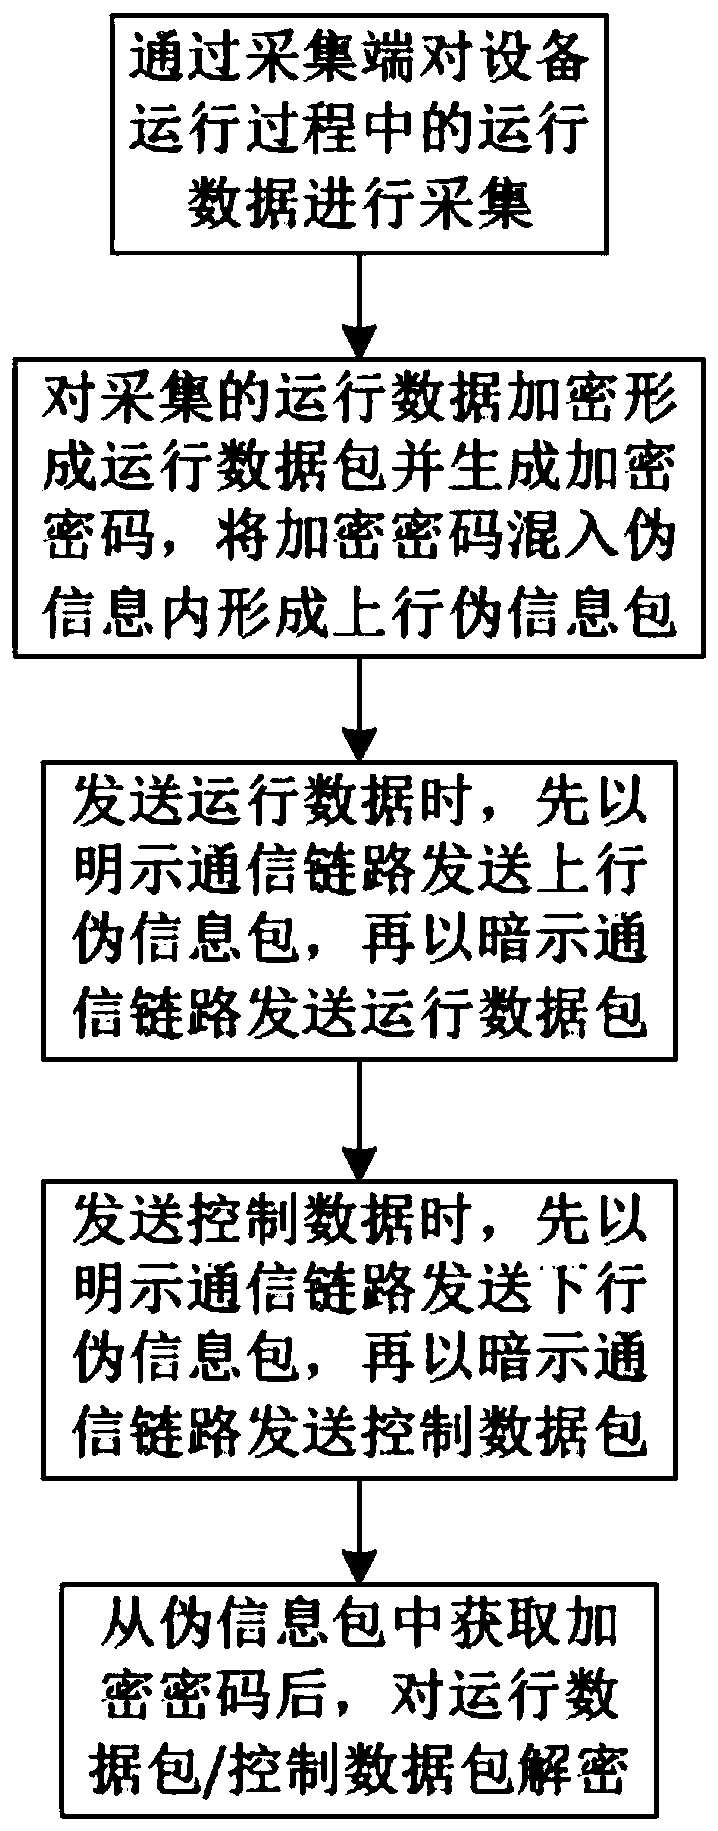 Remote operation and maintenance and data exchange method for equipment industrial control security